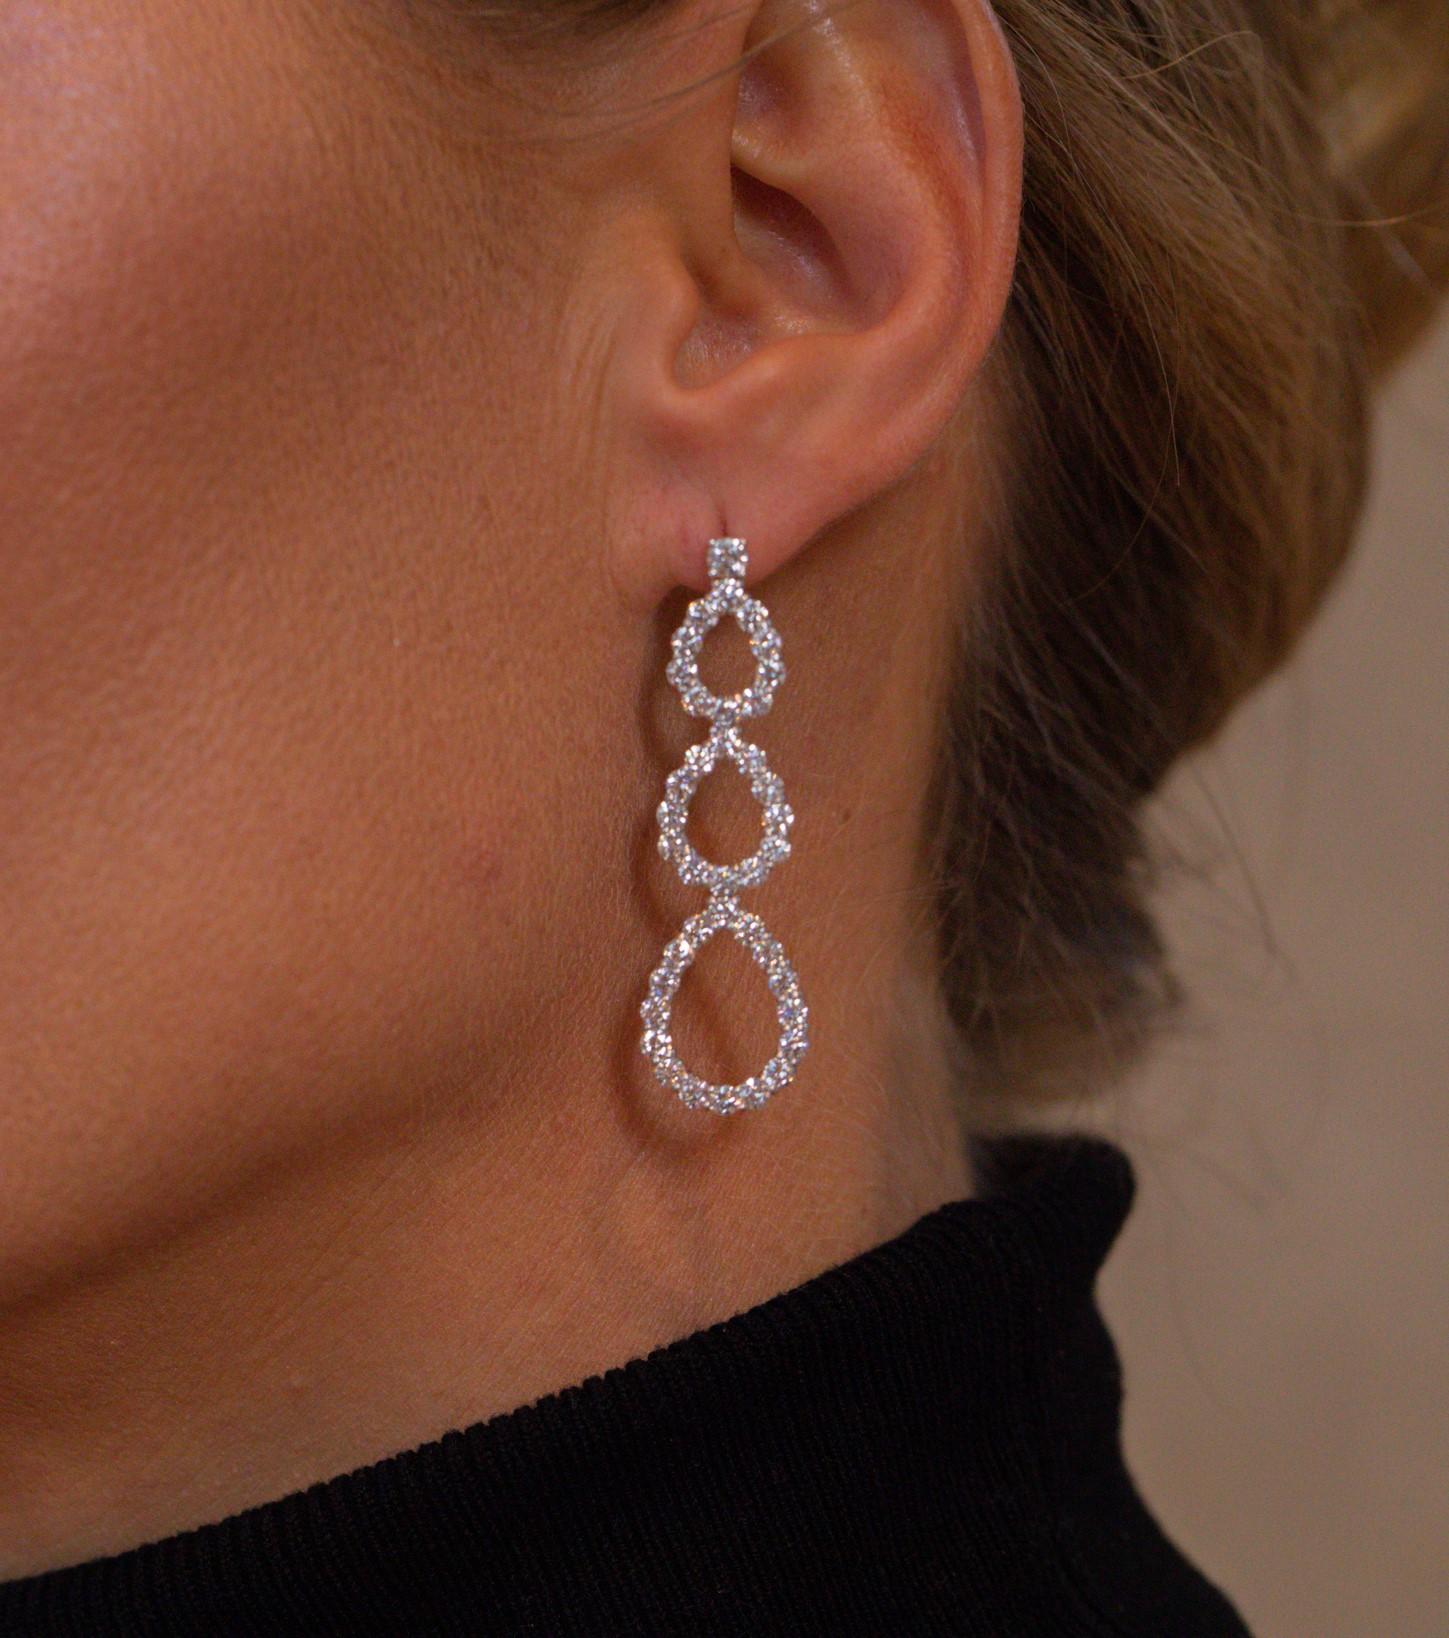 Graduated pear shapes made with 4.5 carats of white diamonds create an exquisite look.  Invisible connections between the pears allow for movement enhancing sparkle.  Created in platinum, each earring measures 2 inches.